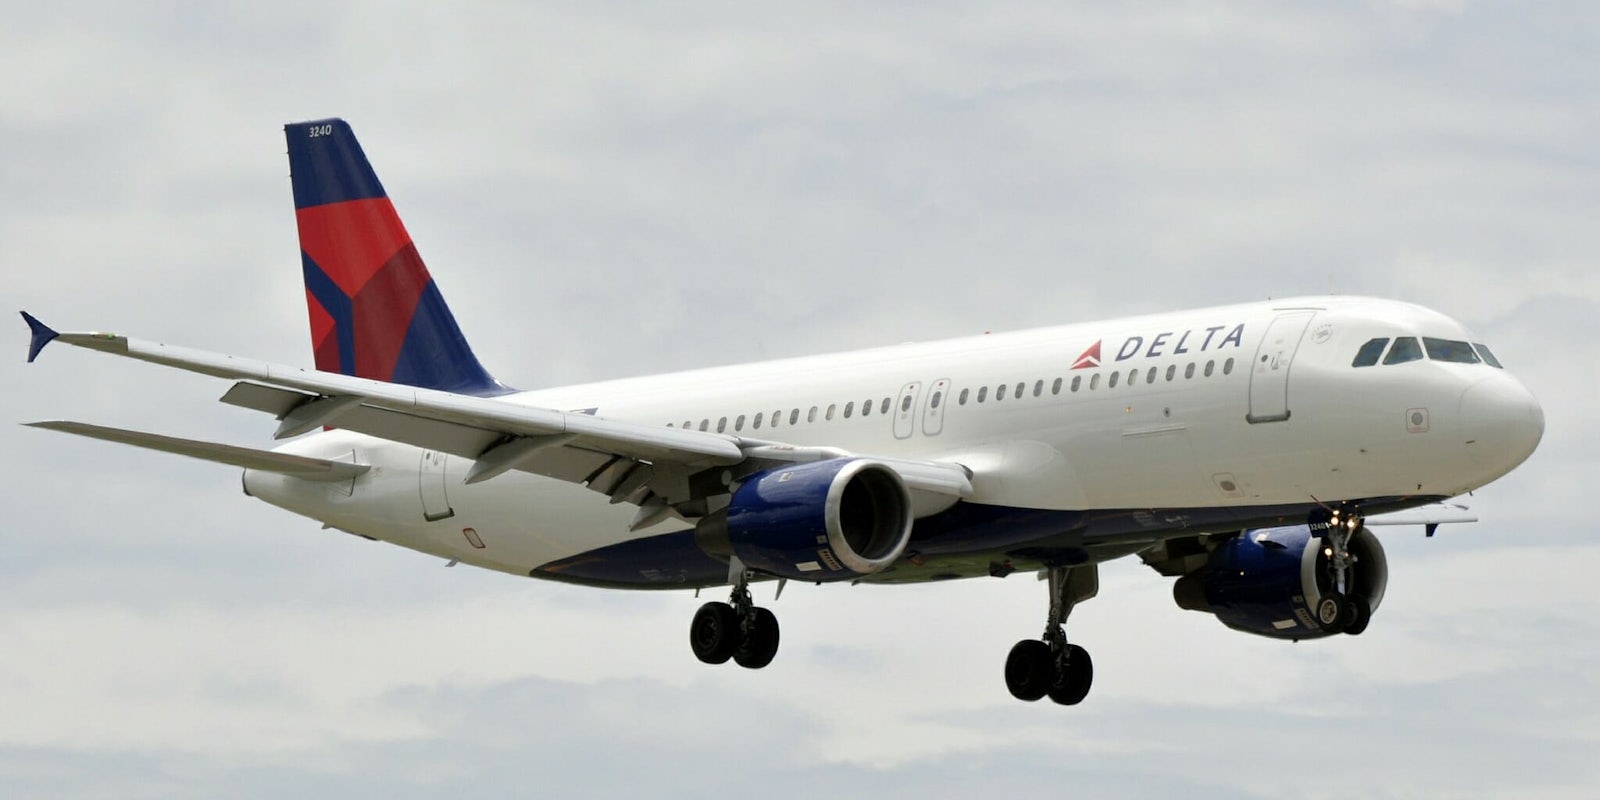 A Delta Airlines airplane midair